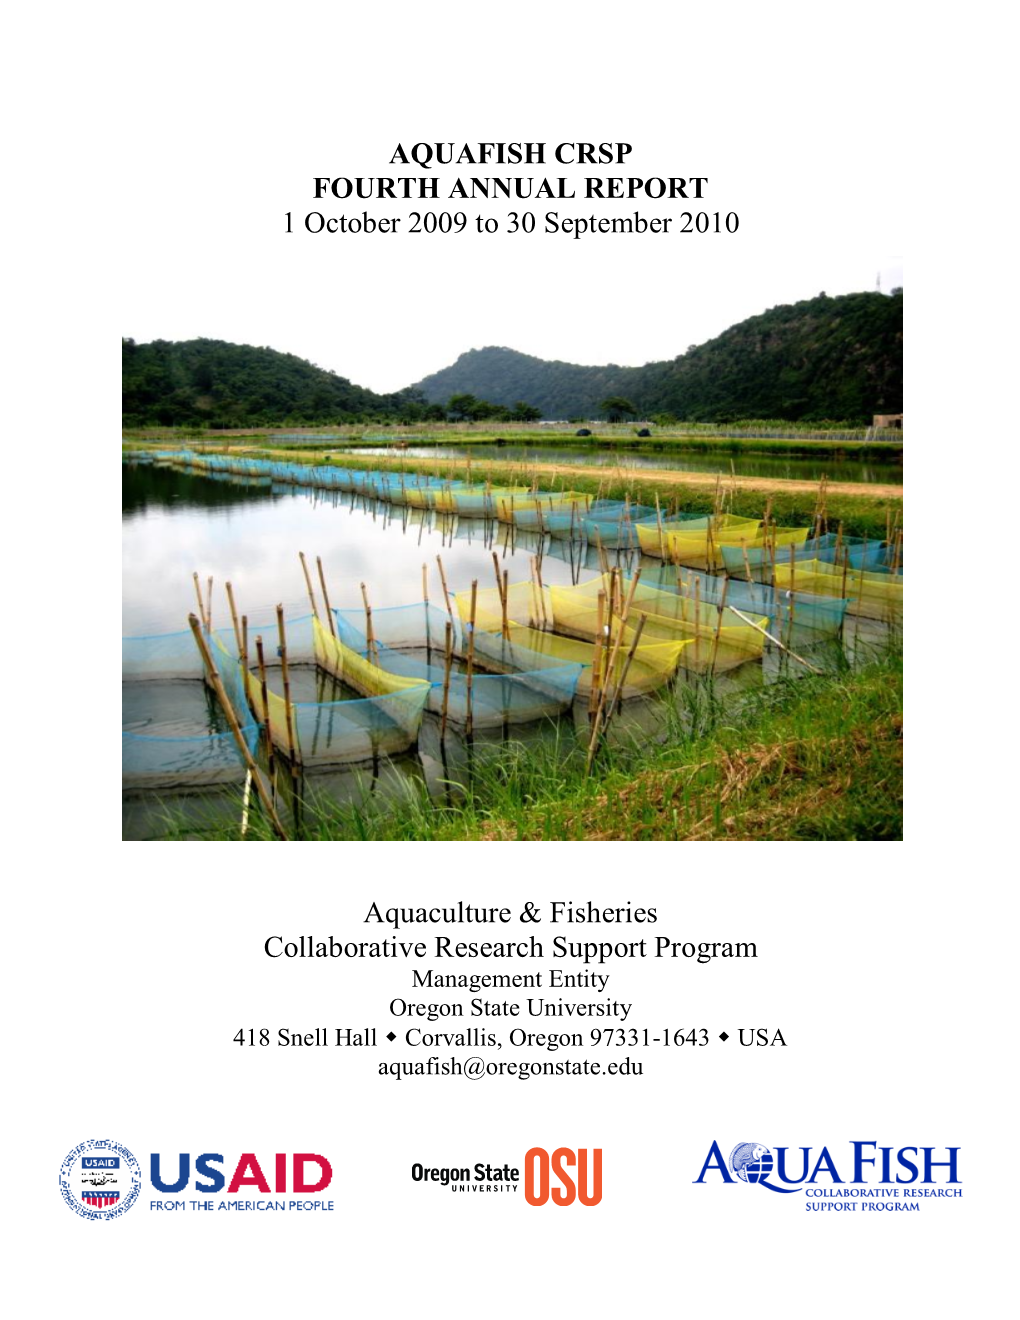 AQUAFISH CRSP FOURTH ANNUAL REPORT 1 October 2009 to 30 September 2010